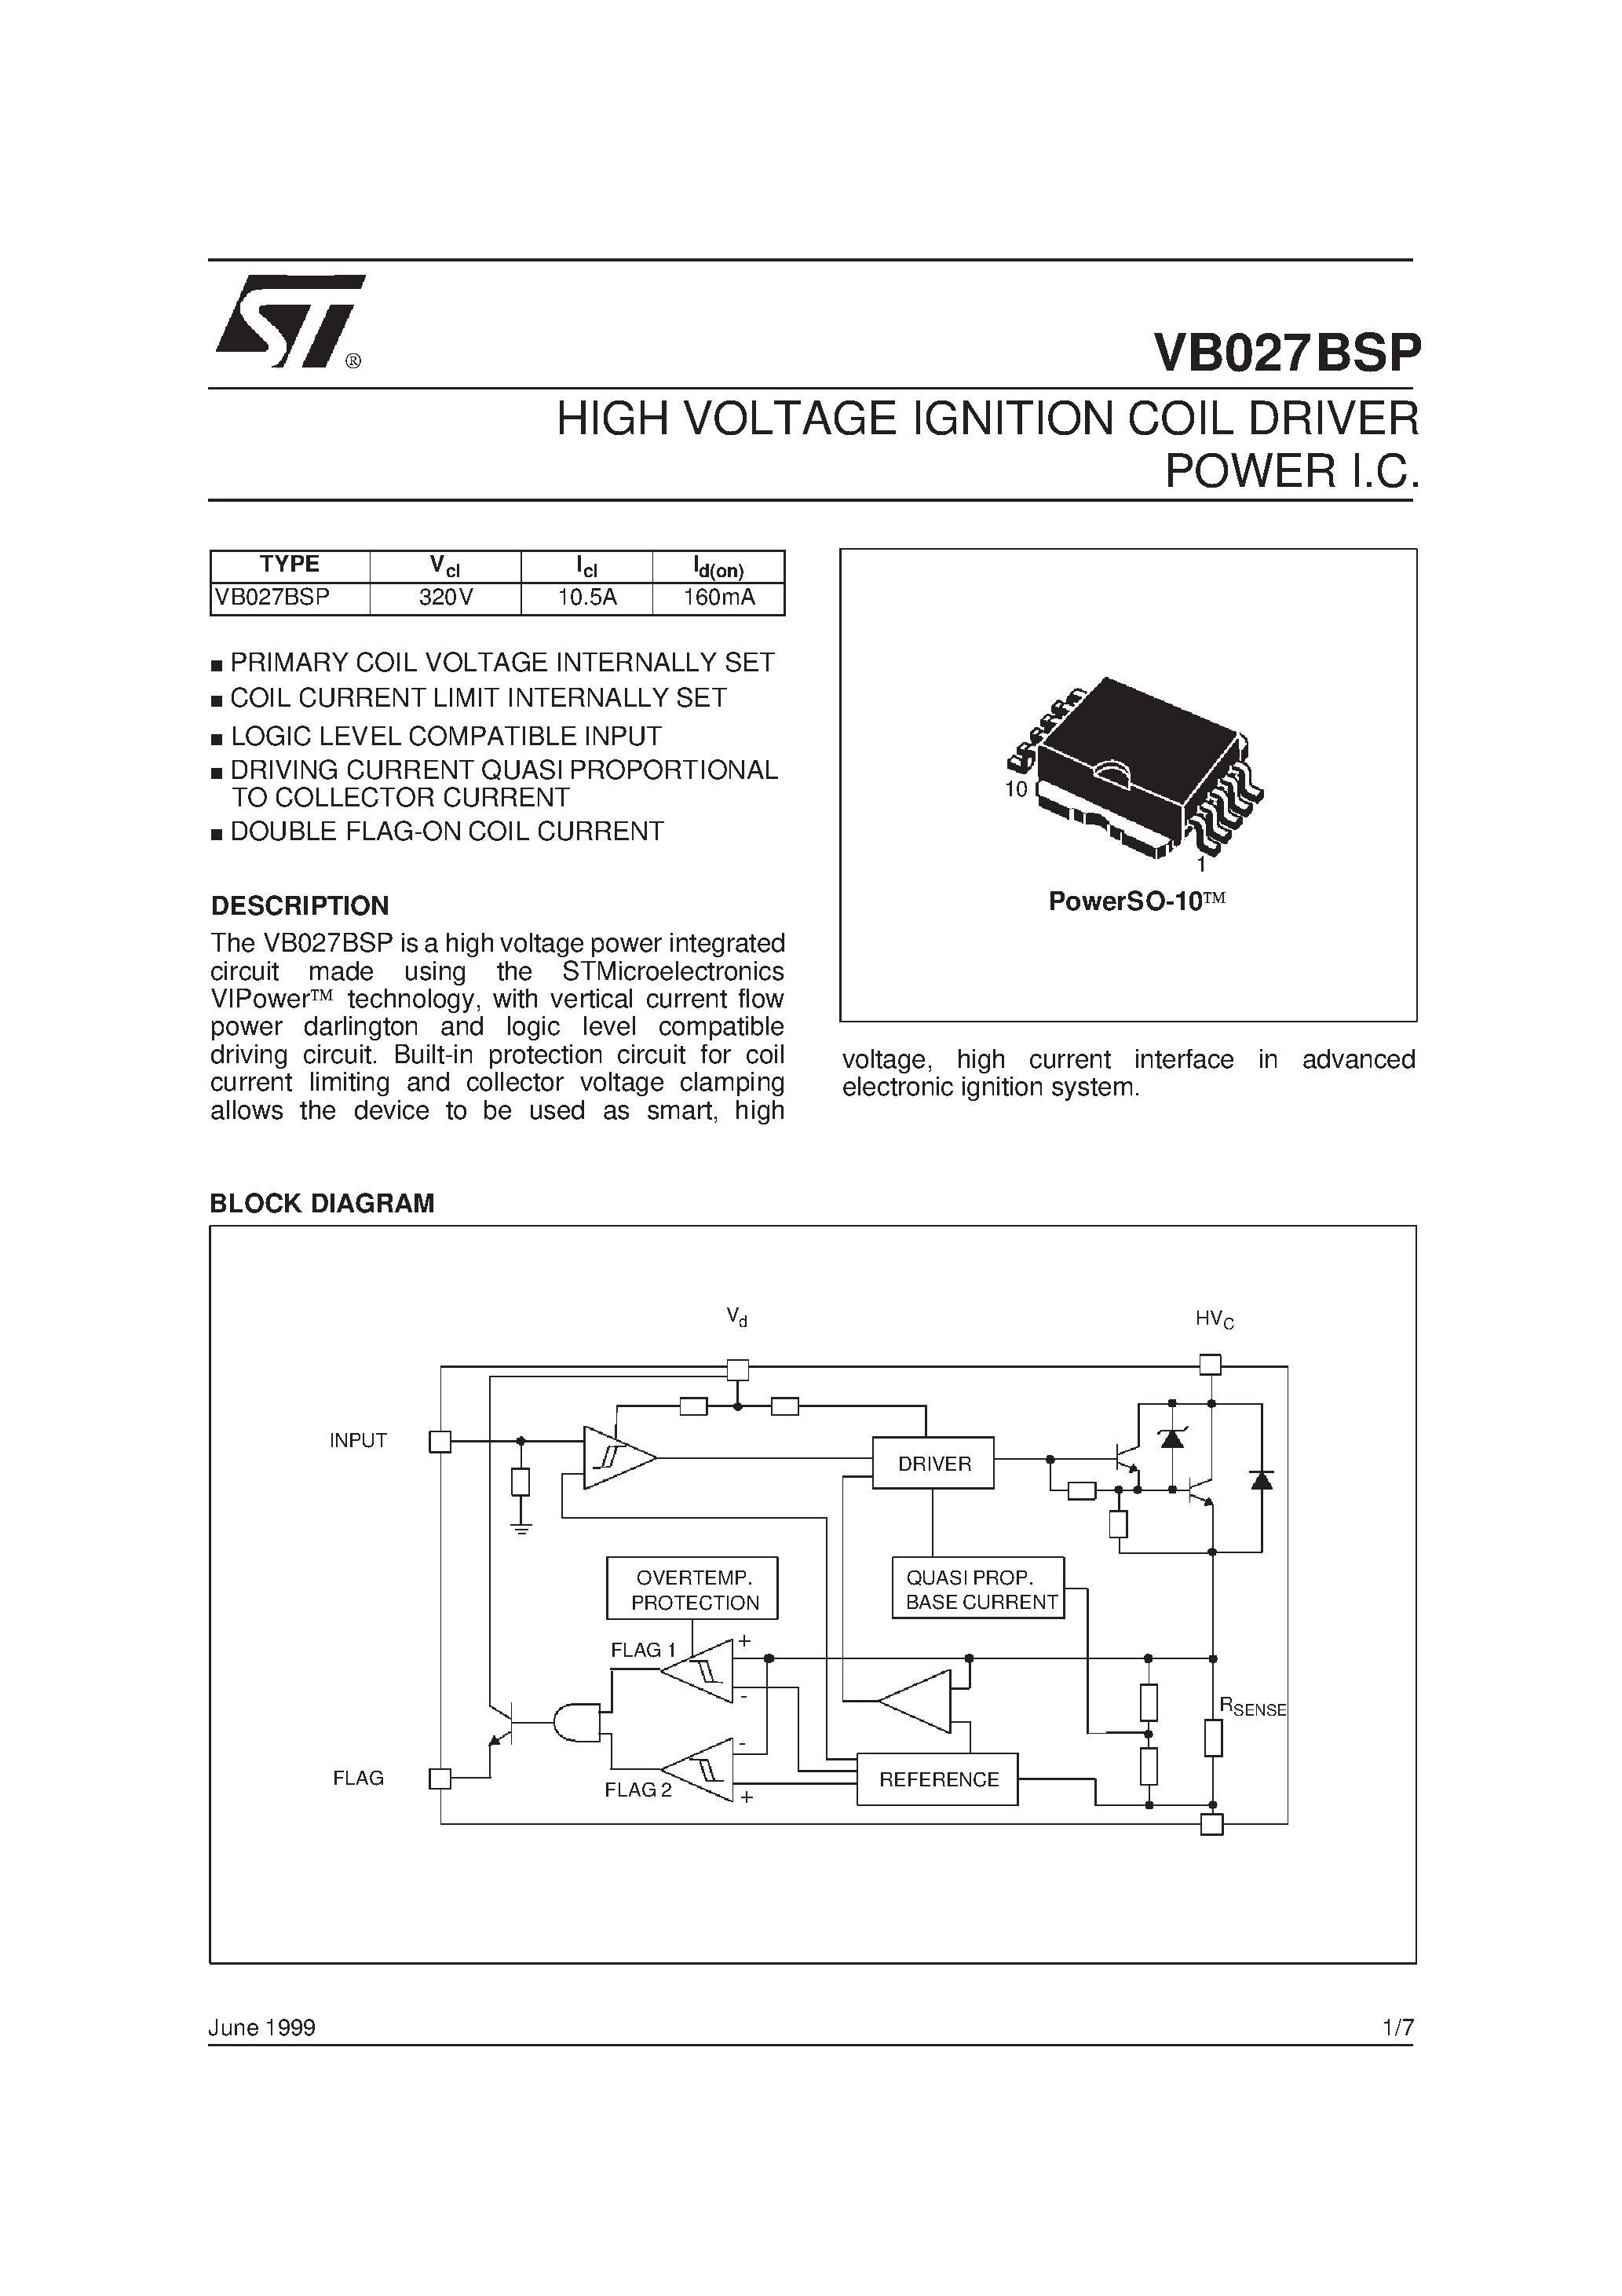 Datasheet VB027BSP - HIGH VOLTAGE IGNITION COIL DRIVER POWER I.C. page 1